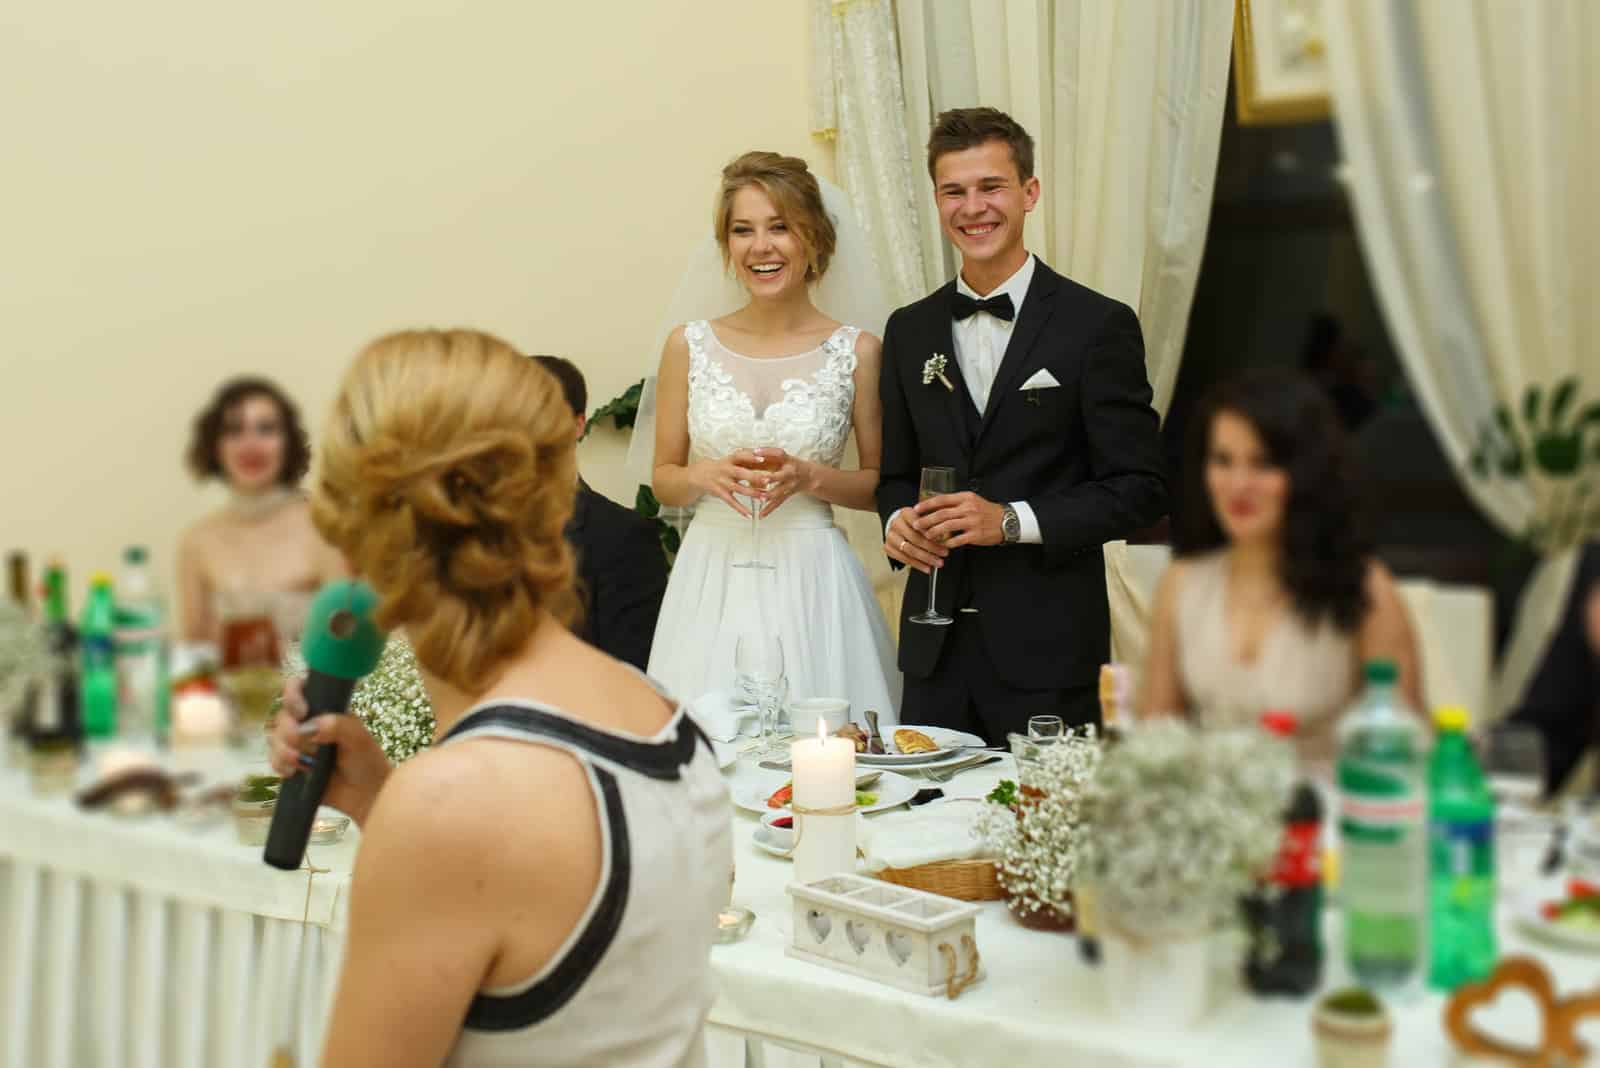 the woman sits in a chair and gives a speech to the newlyweds